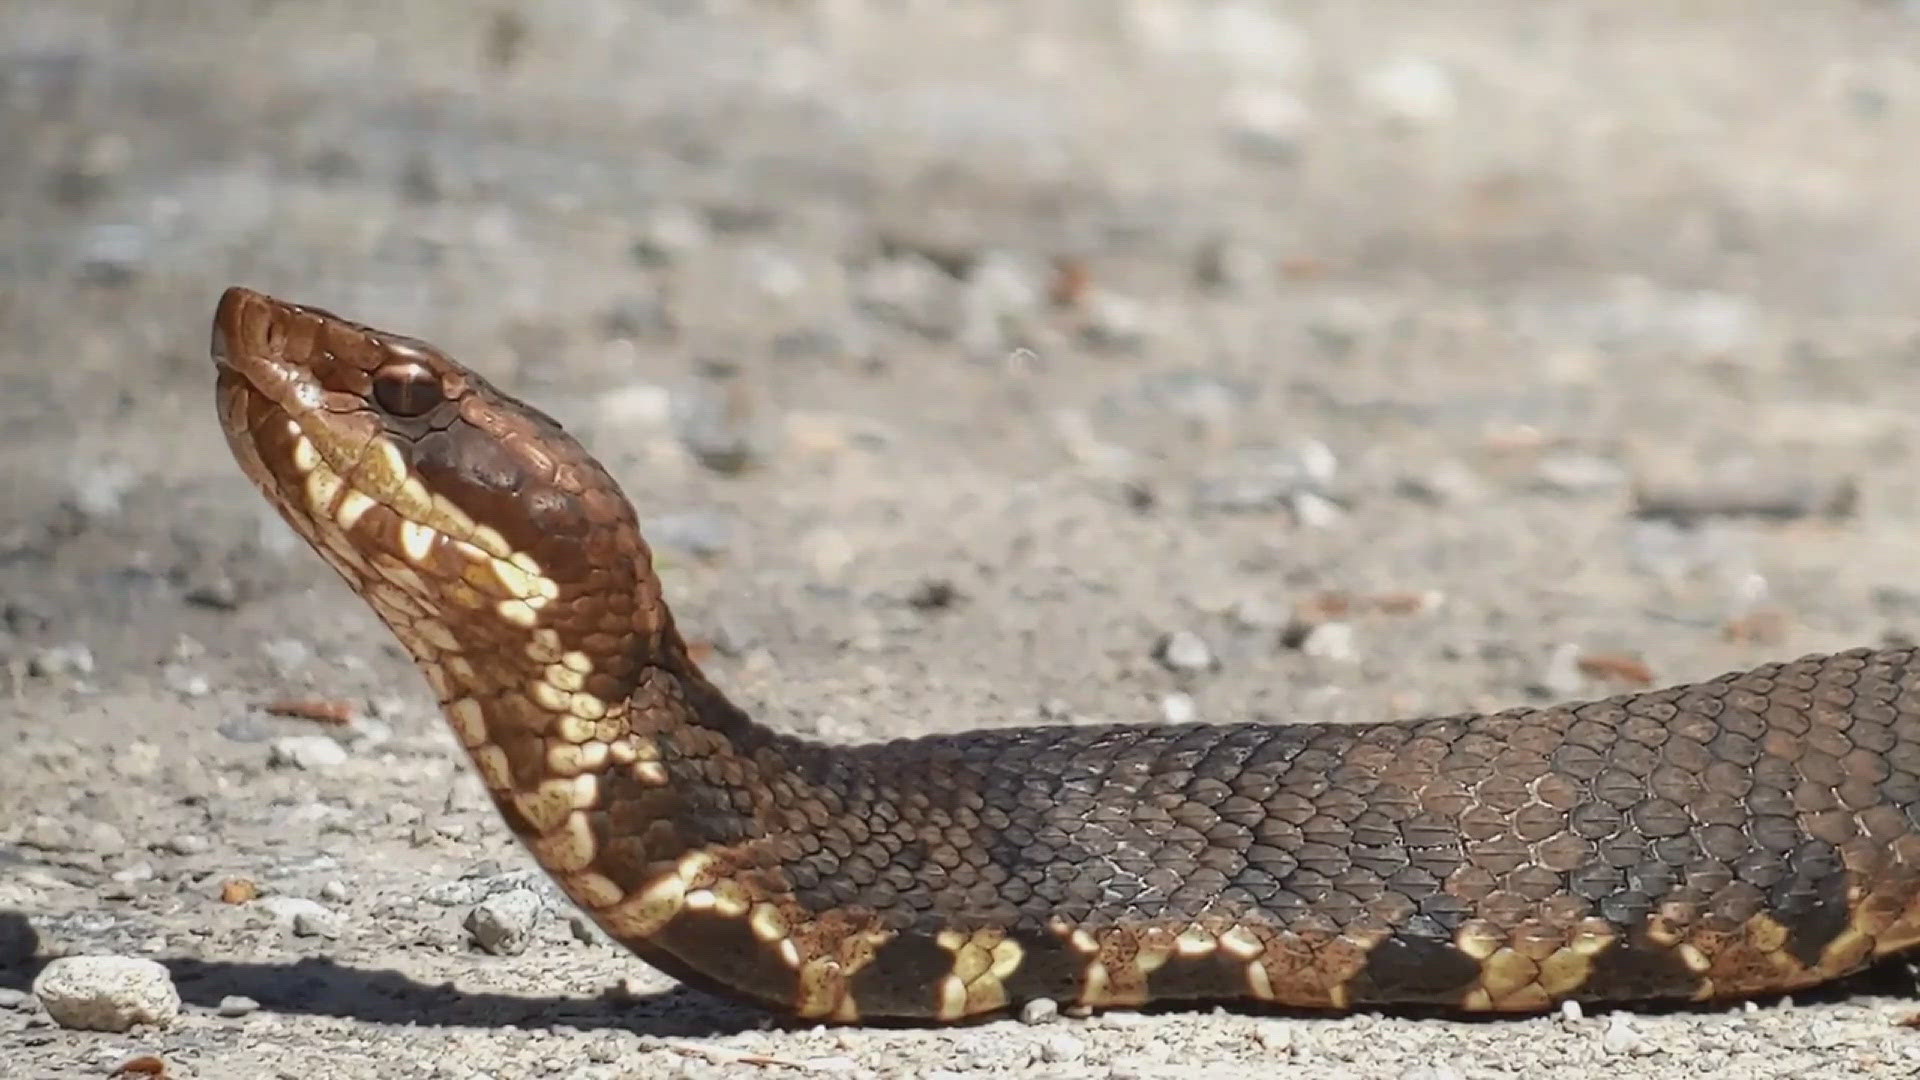 LaRue Road in Shawnee National Forest is the only road in the world that closes to cars for a bi-annual snake and reptile migration in the spring and fall.